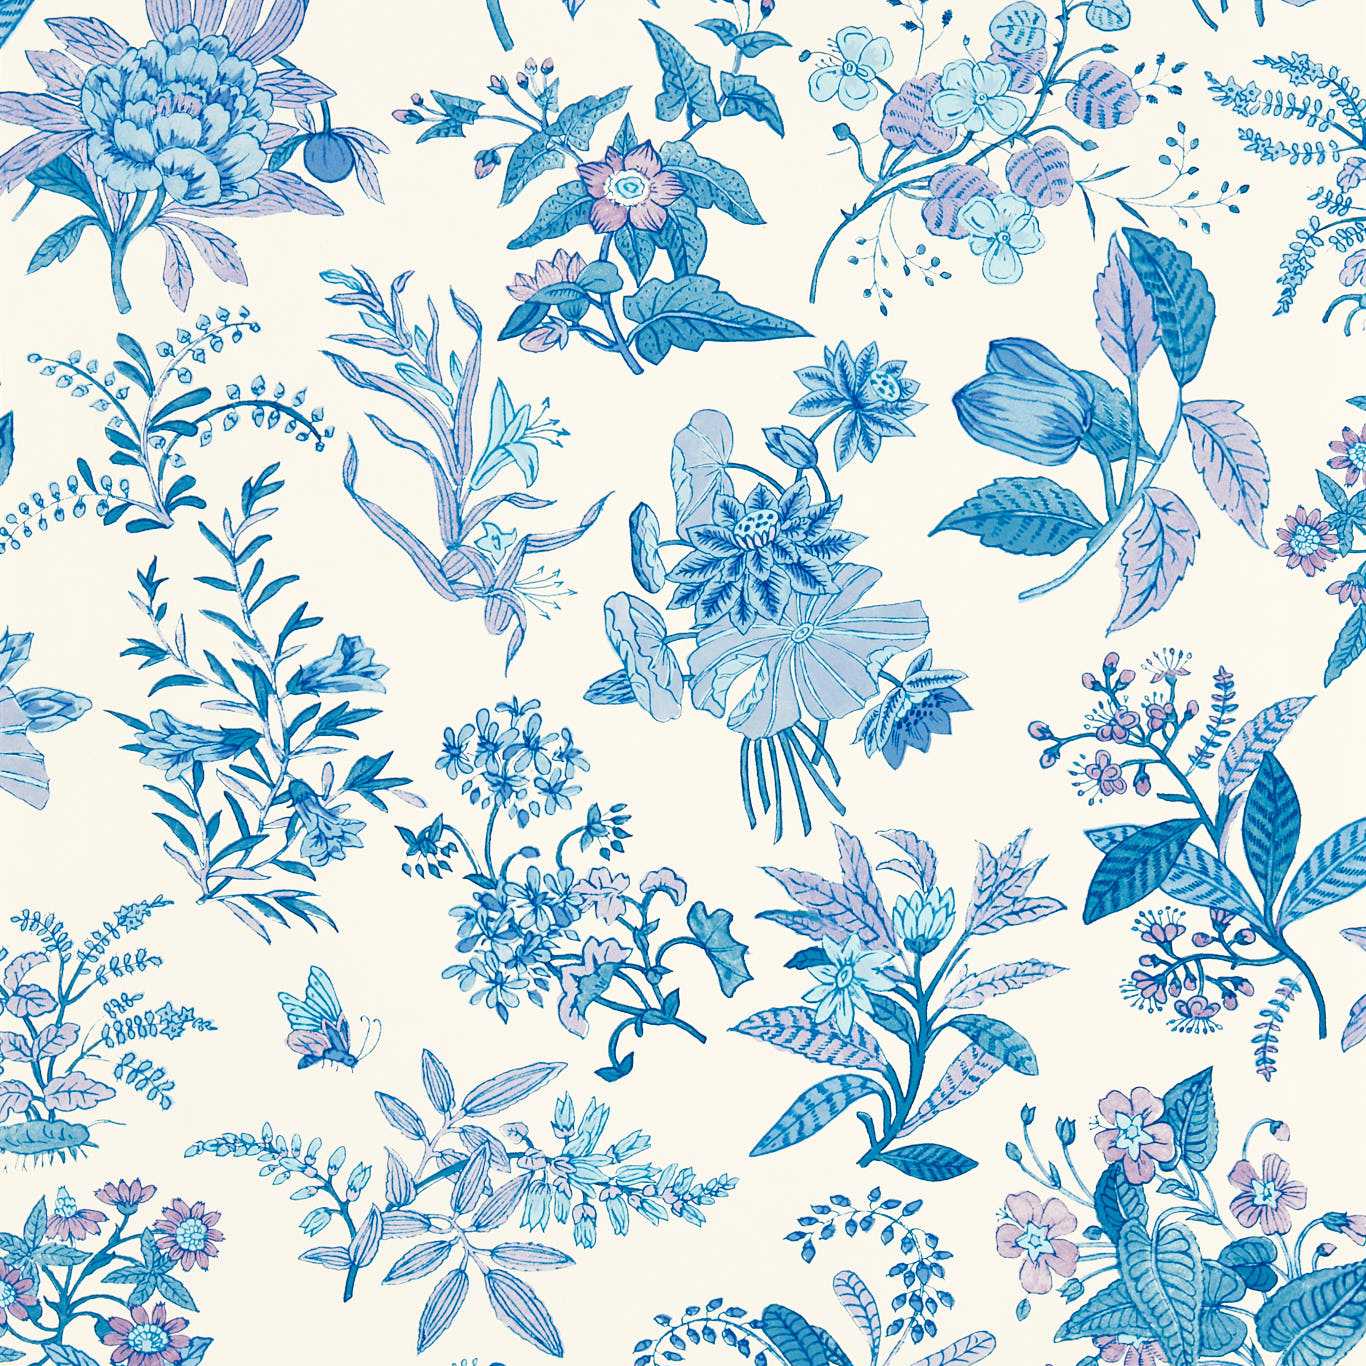 Woodland Floral Lapis/Amethyst/Pearl Wallpaper HSRW113059 by Harlequin